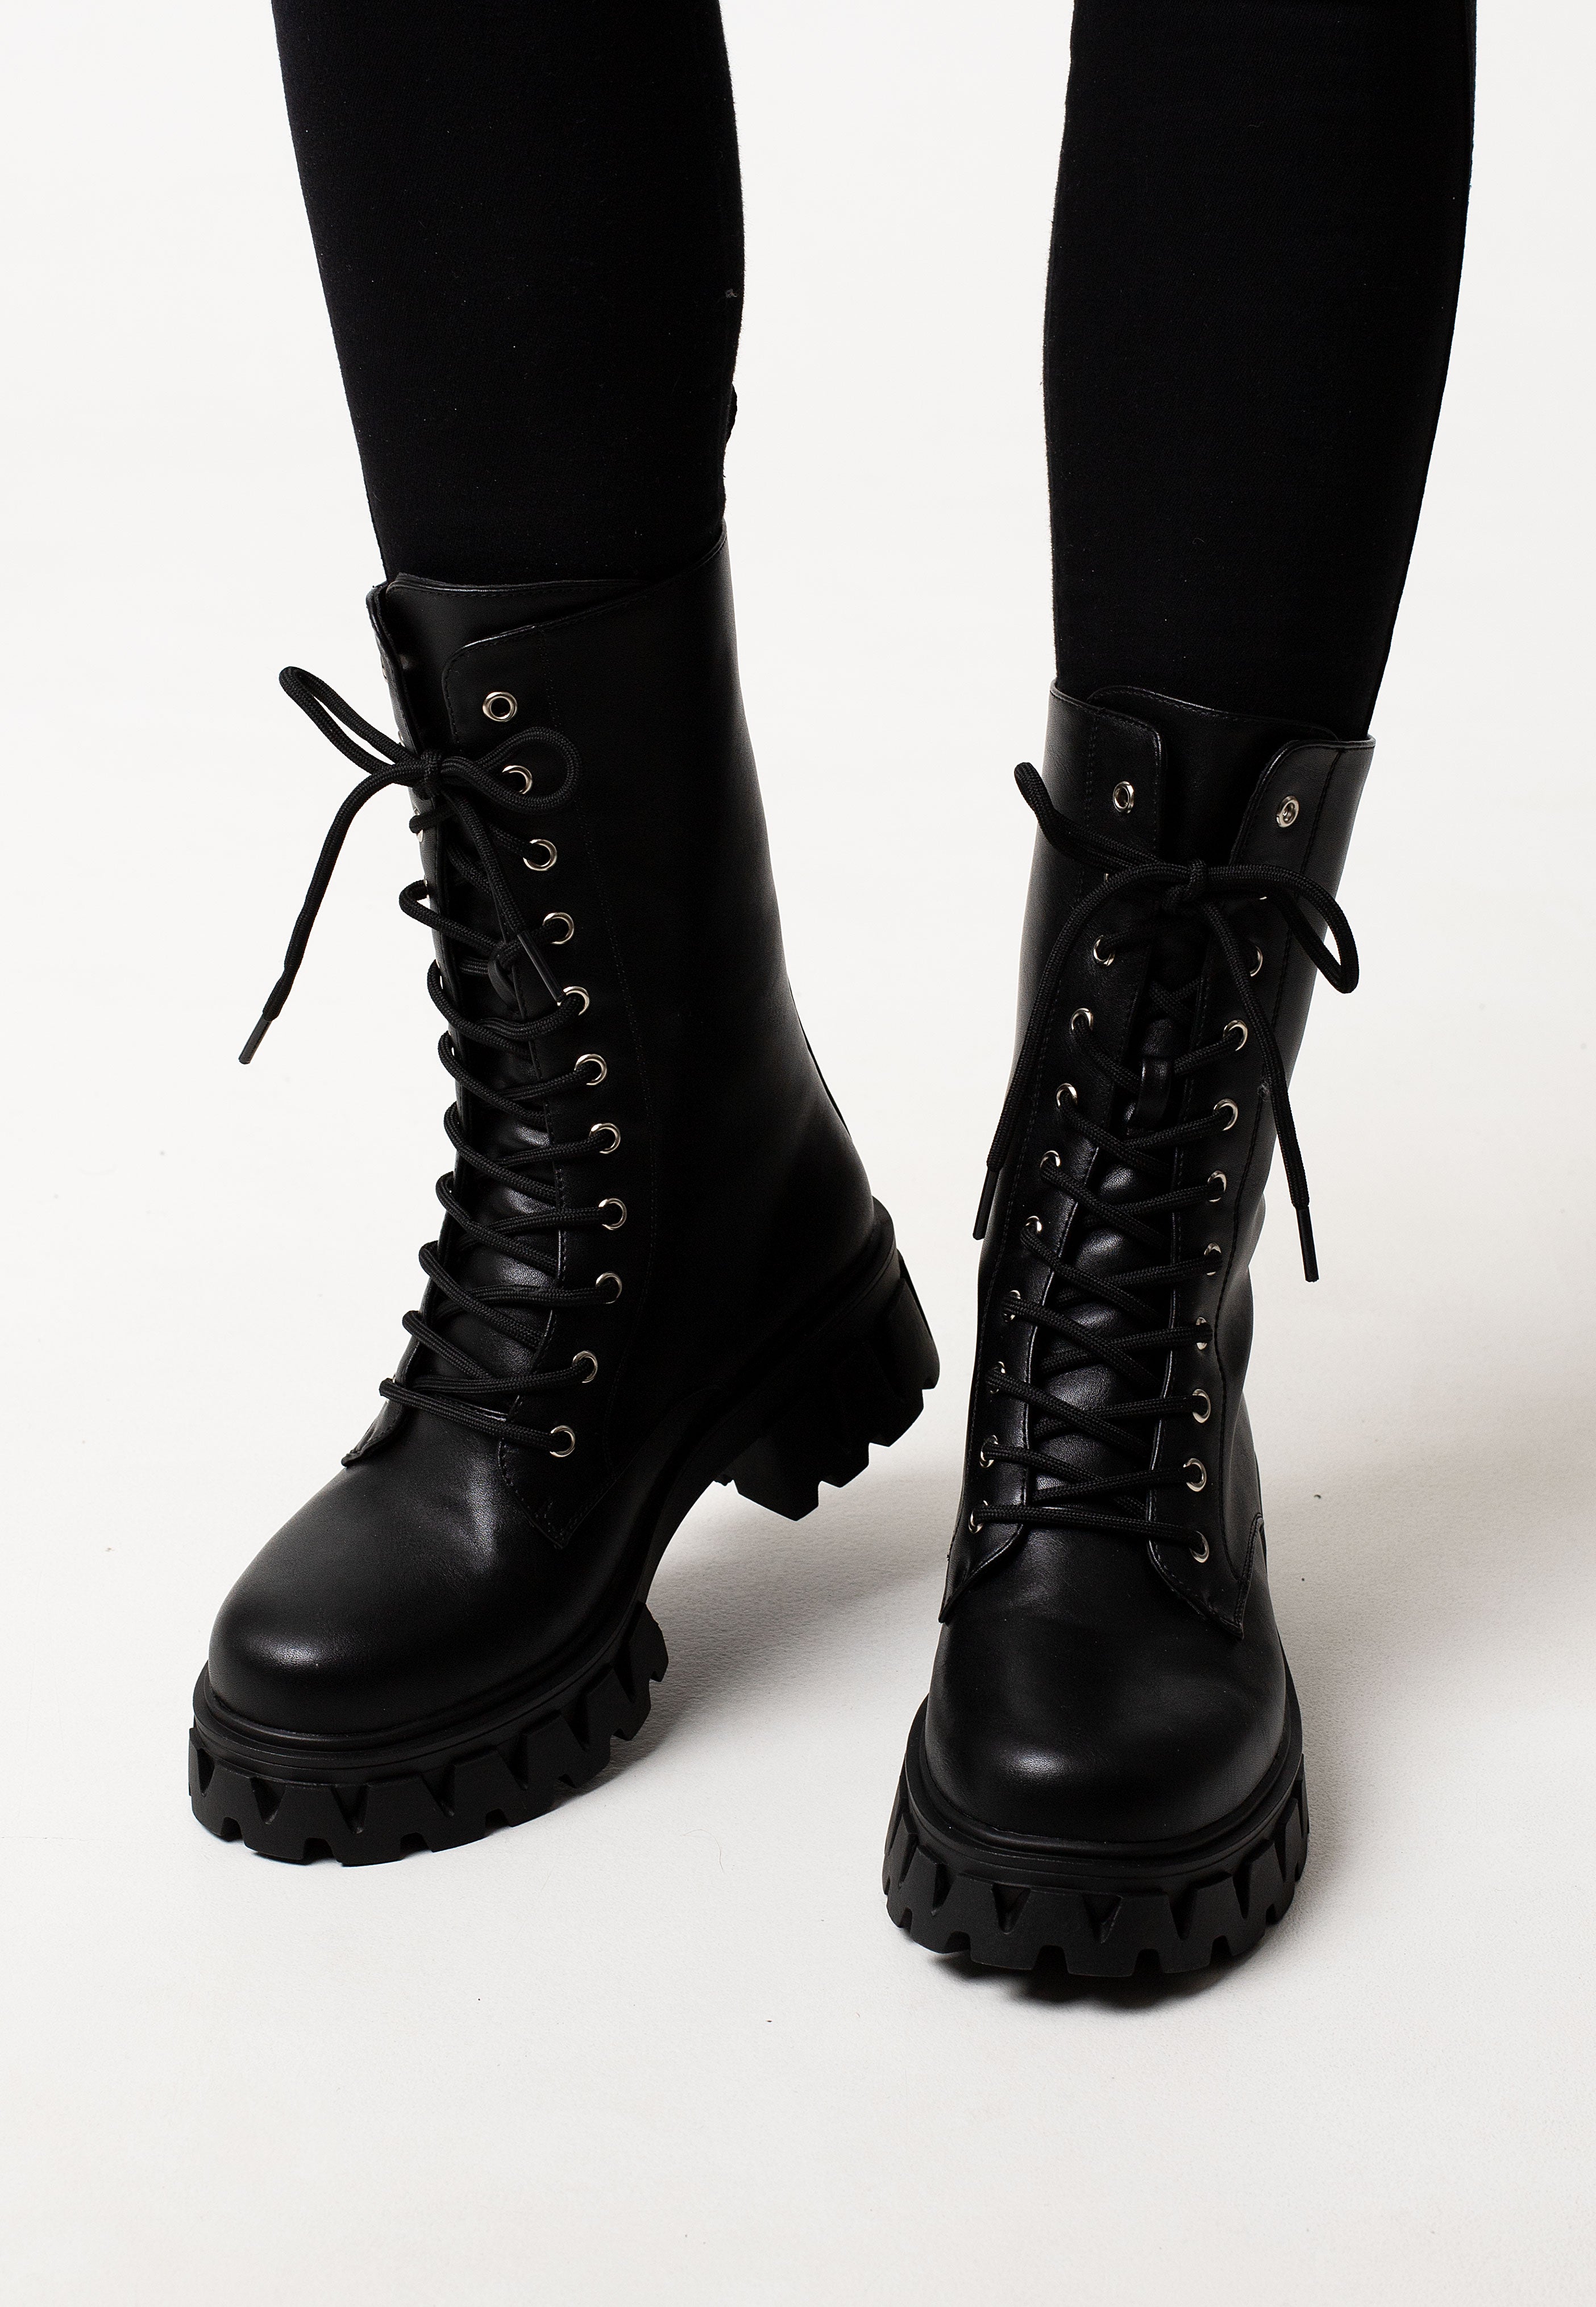 Koi Footwear - Siren Tall Lace Up Black - Girl Shoes